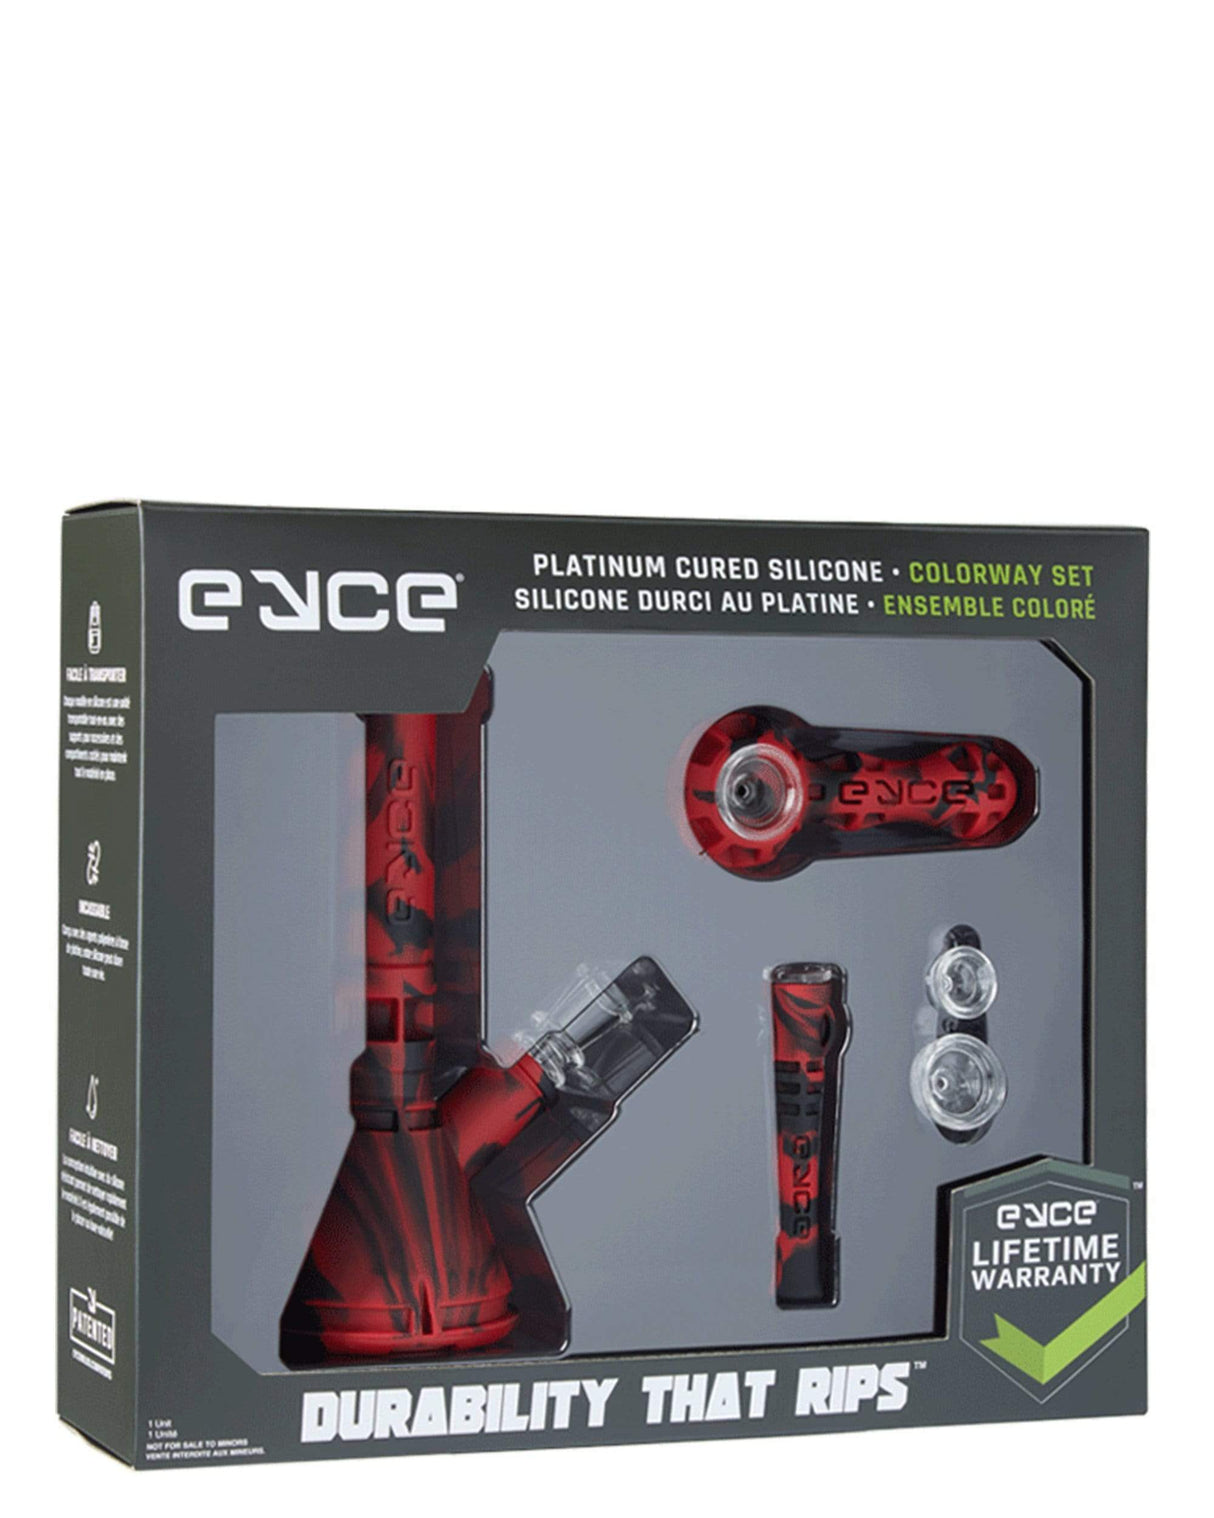 Eyce Colorway Boxed Set featuring silicone bong, lighter, and stash jar in red color variant